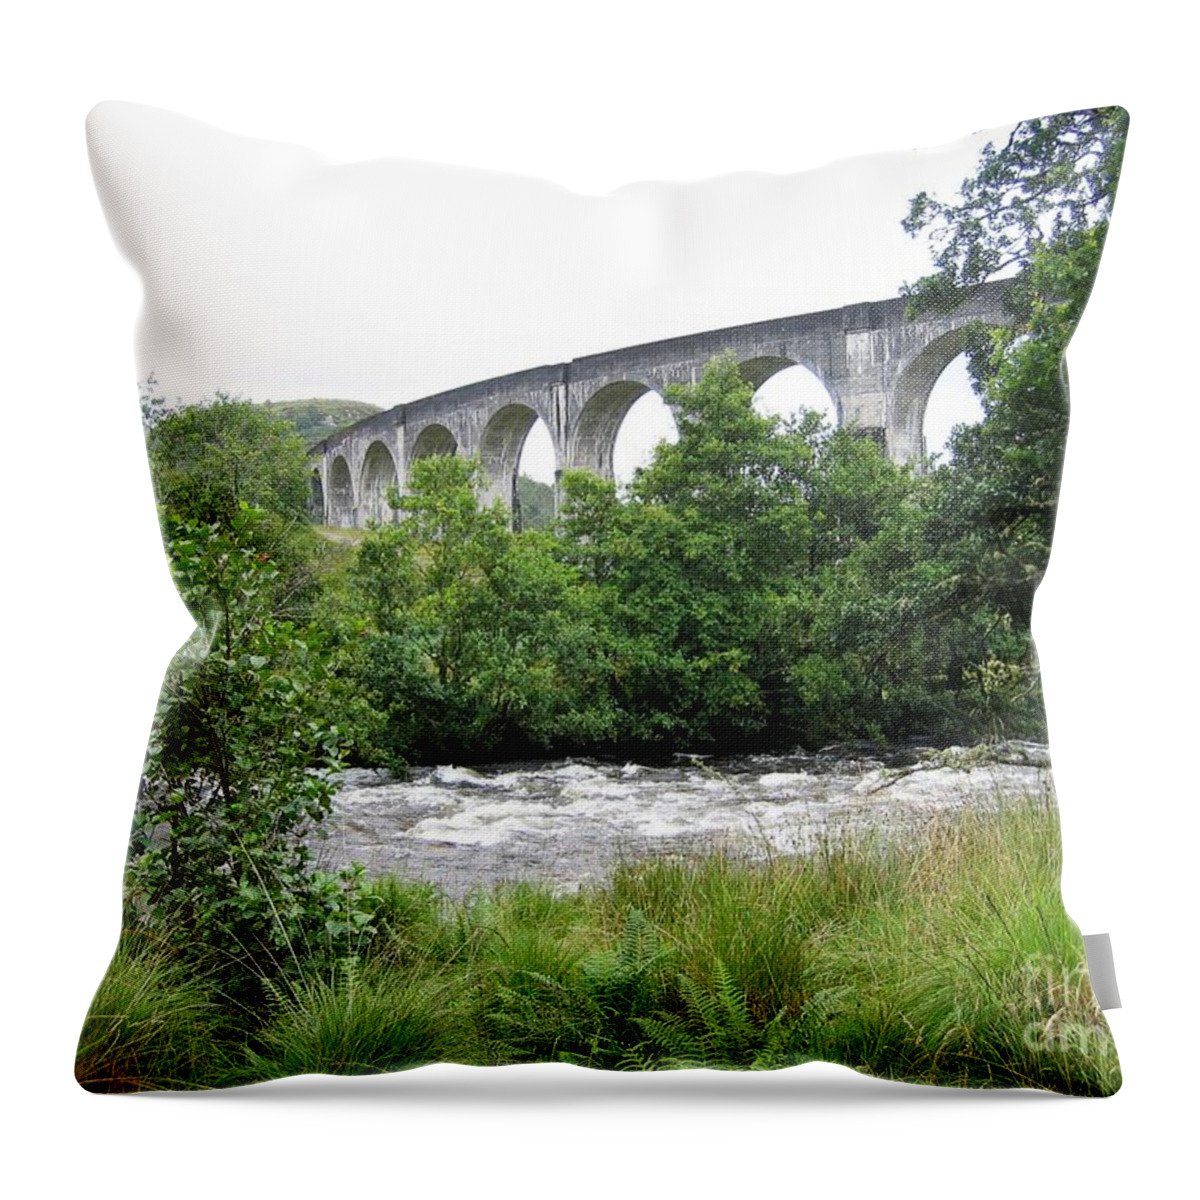 Scottish Highlands Throw Pillow featuring the photograph The River And The Viaduct by Denise Railey